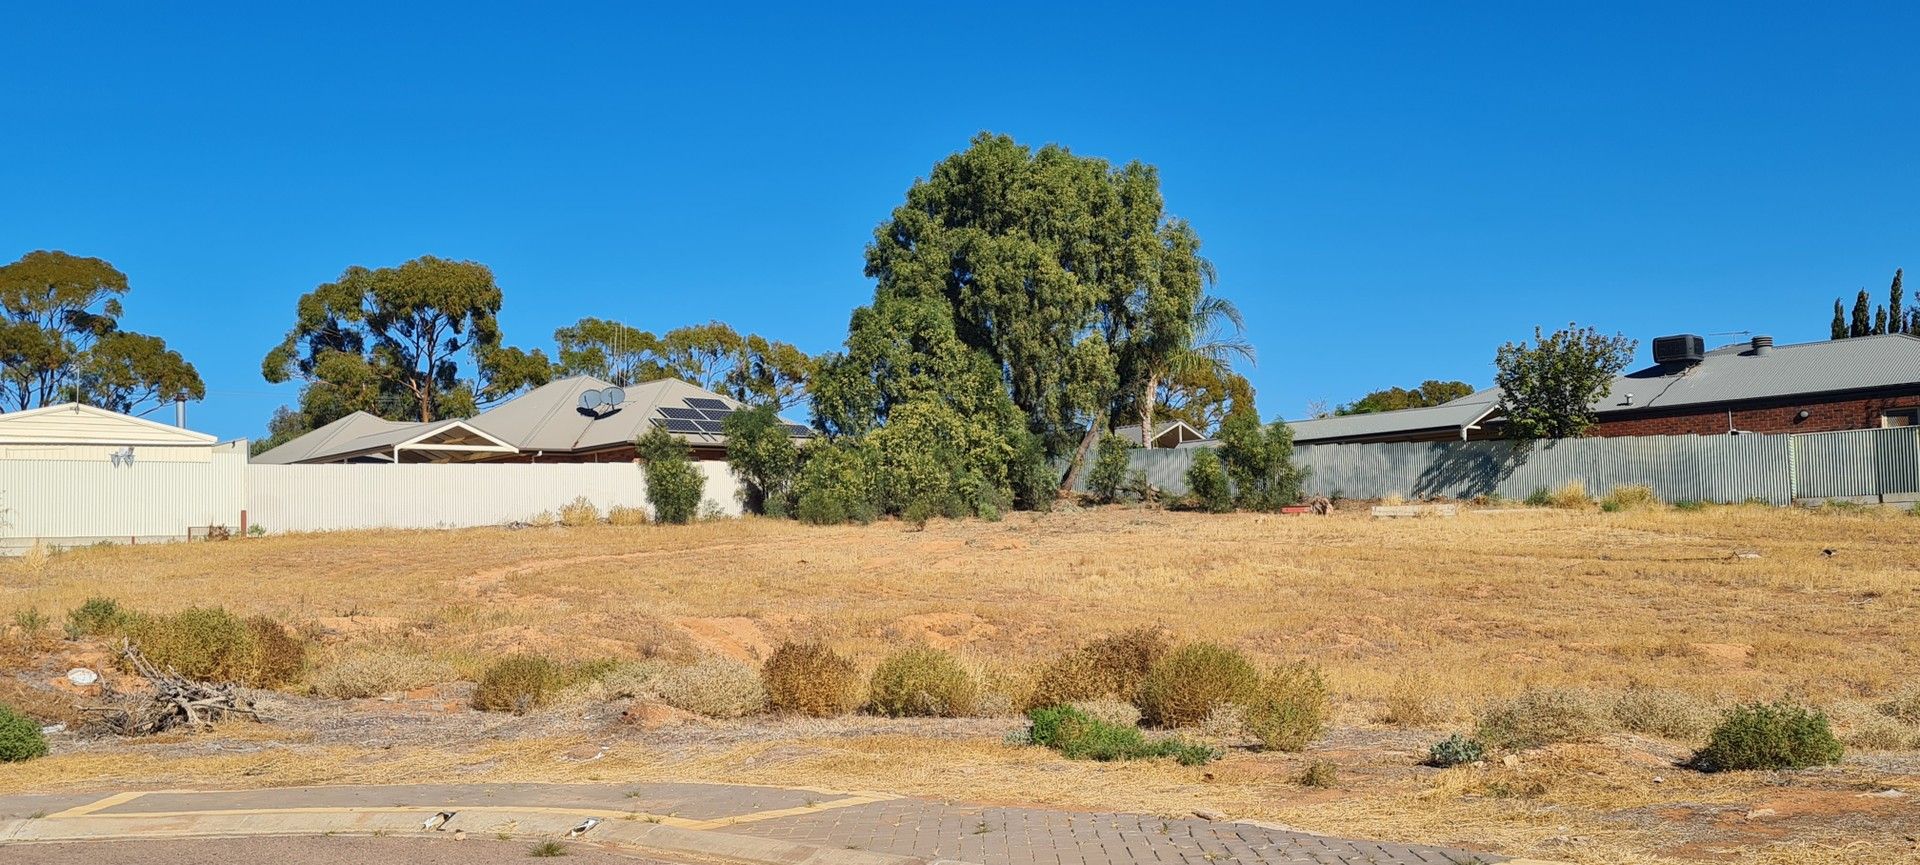 Lot 7/6 Cleary Street, Port Augusta West SA 5700, Image 0